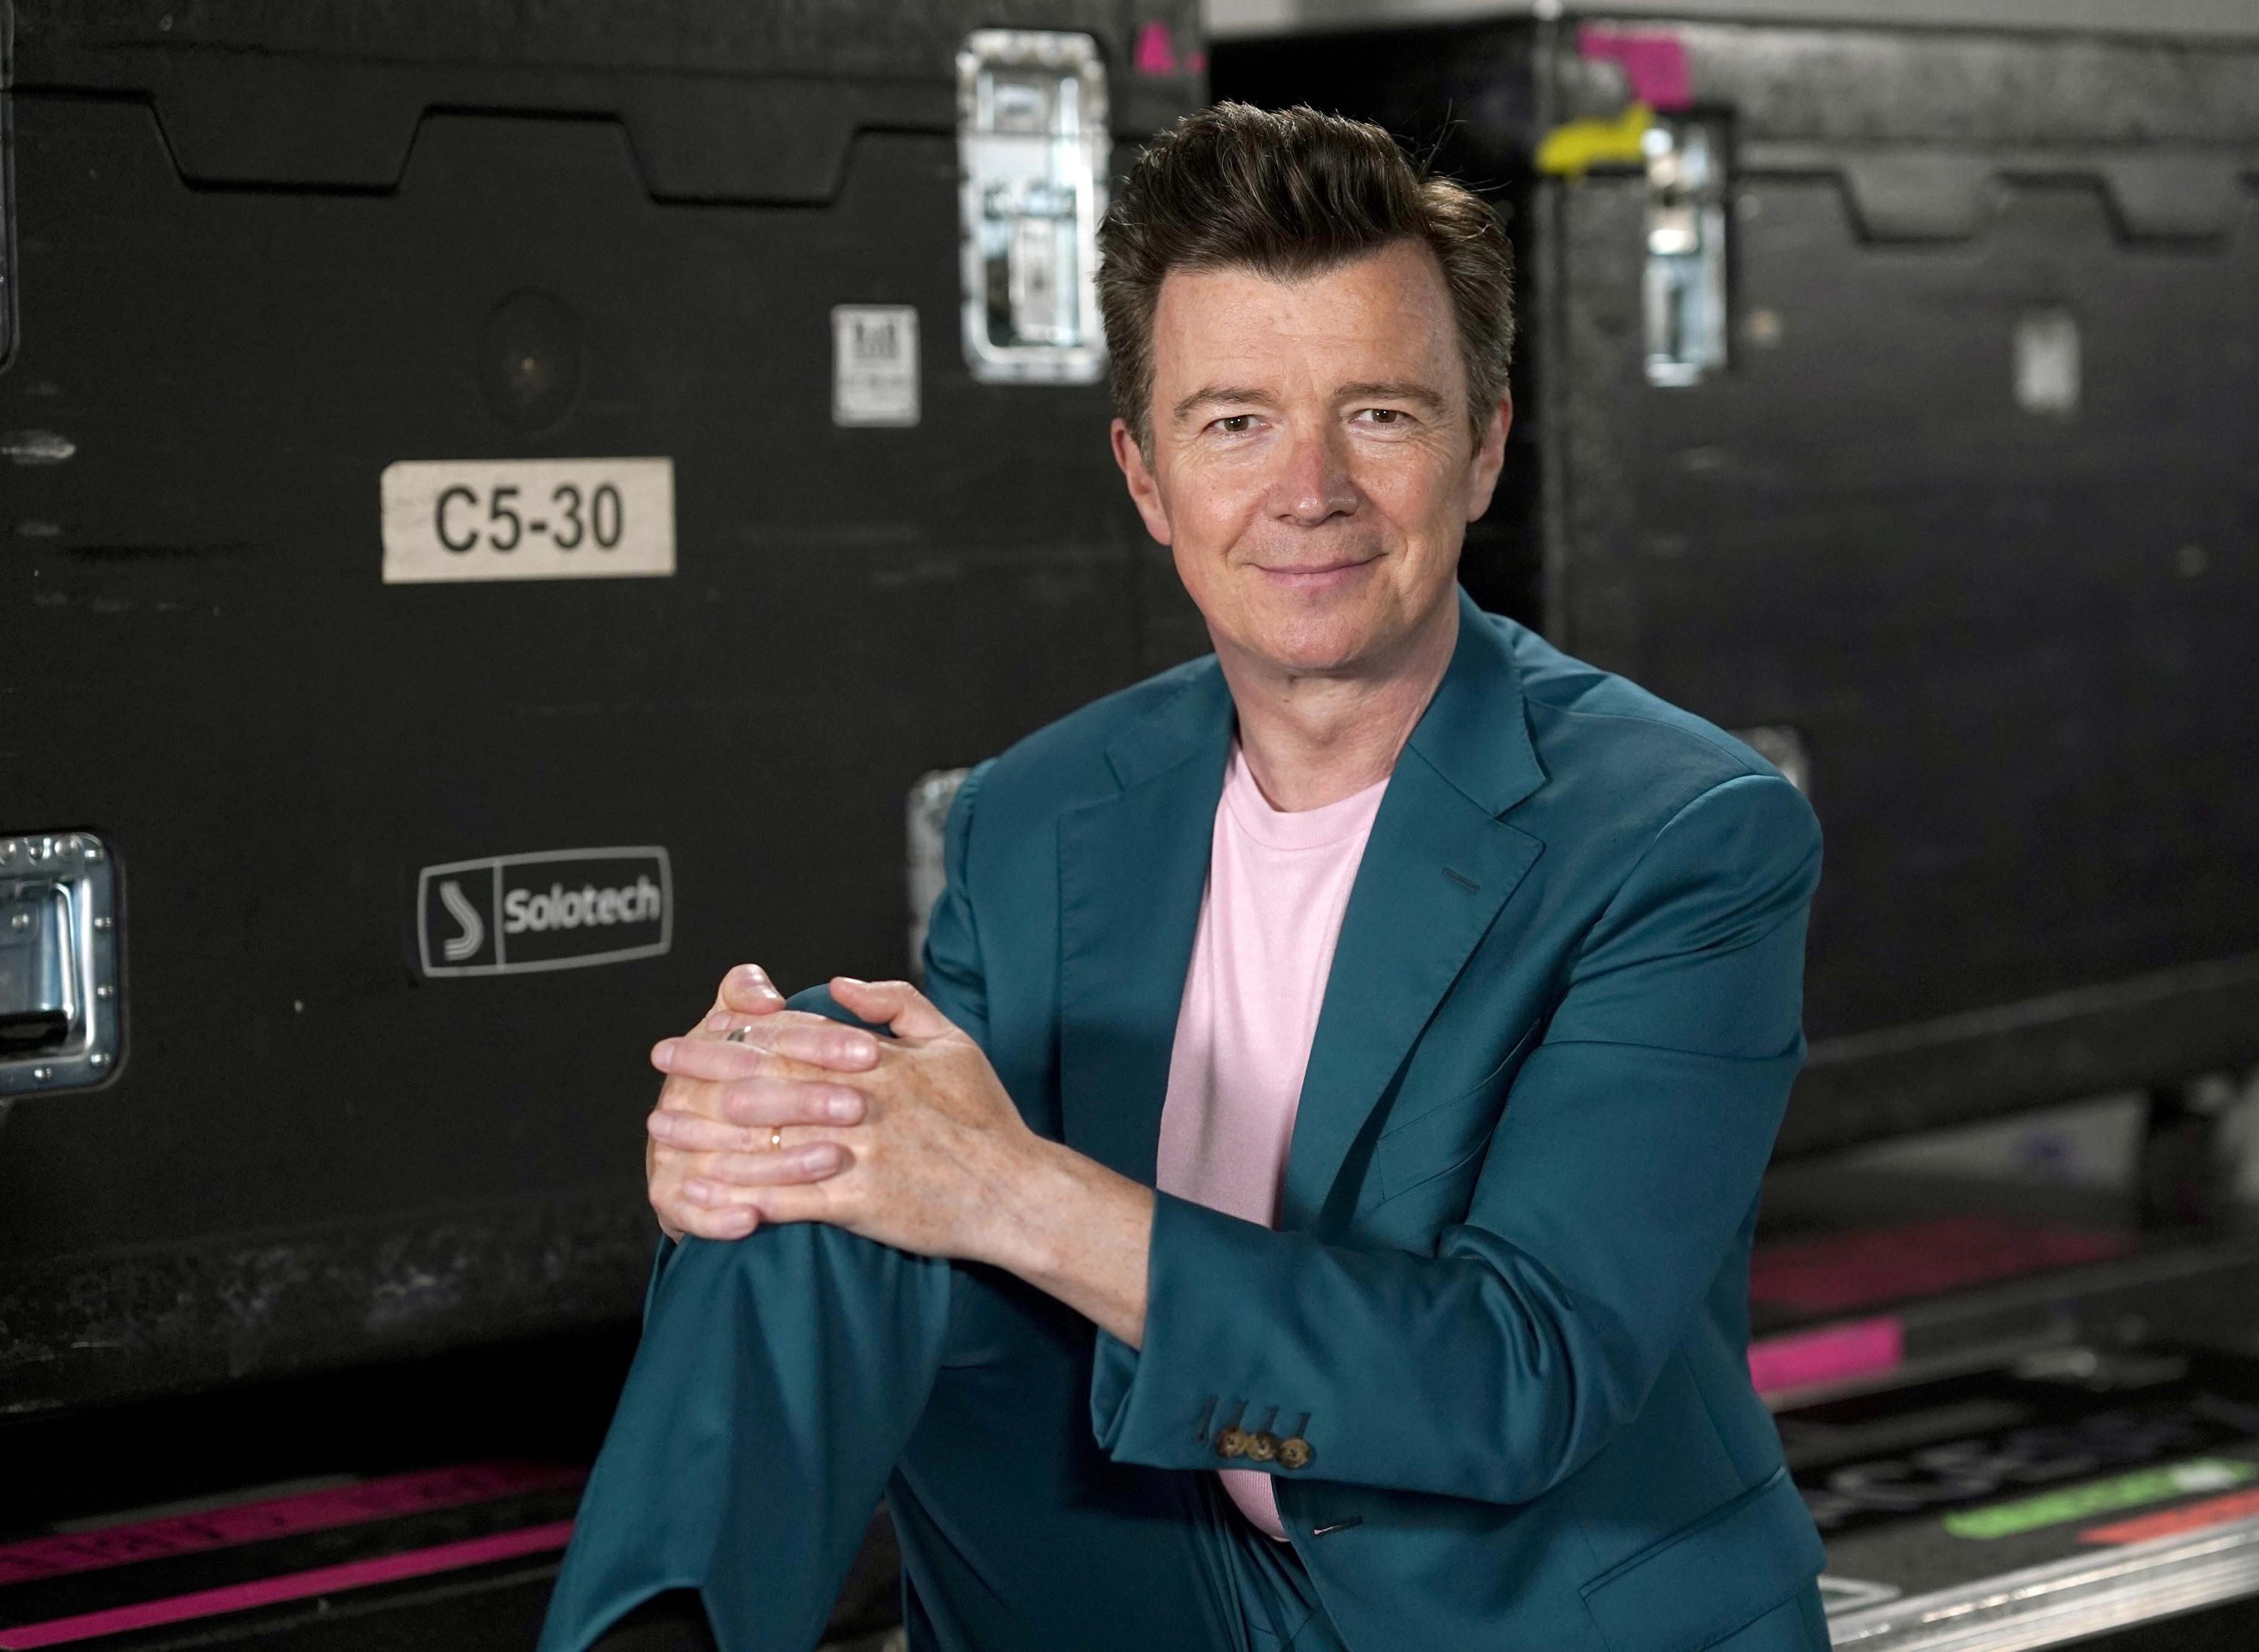 Thanks To A Long-Running Internet Meme, Rick Astley's 'Never Gonna Give You  Up' Has Reached More Than A Billion Views On